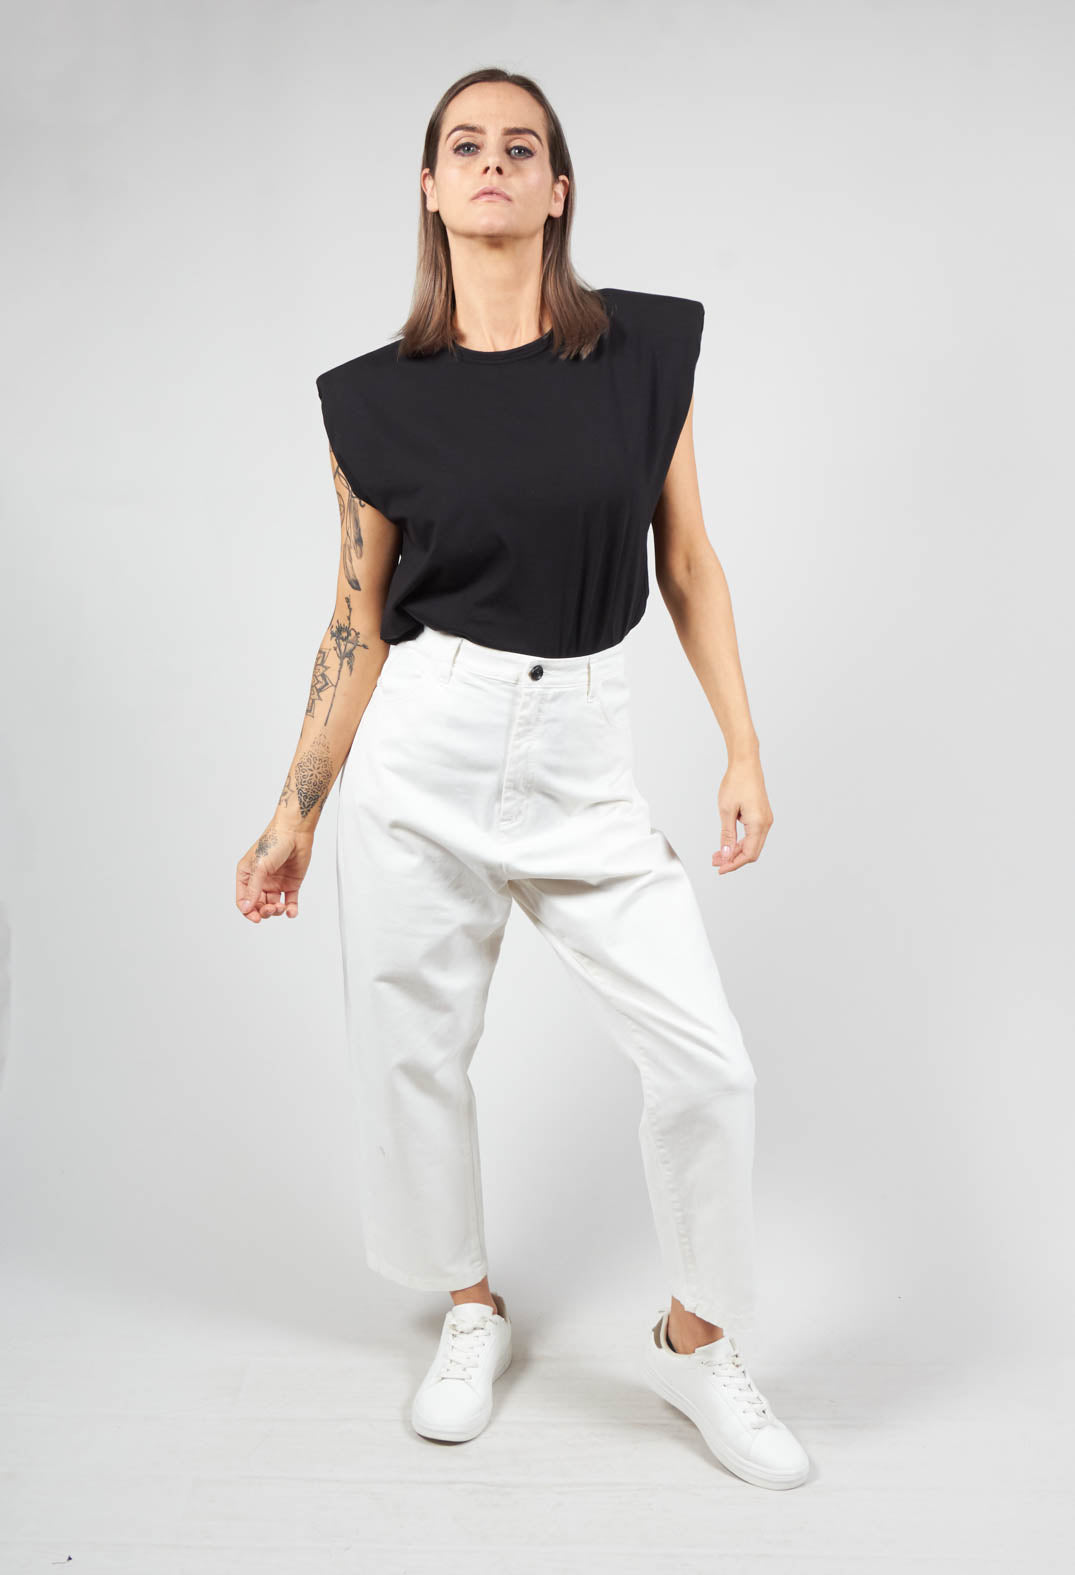 Sleeveless Top with Shoulder Pads in Black